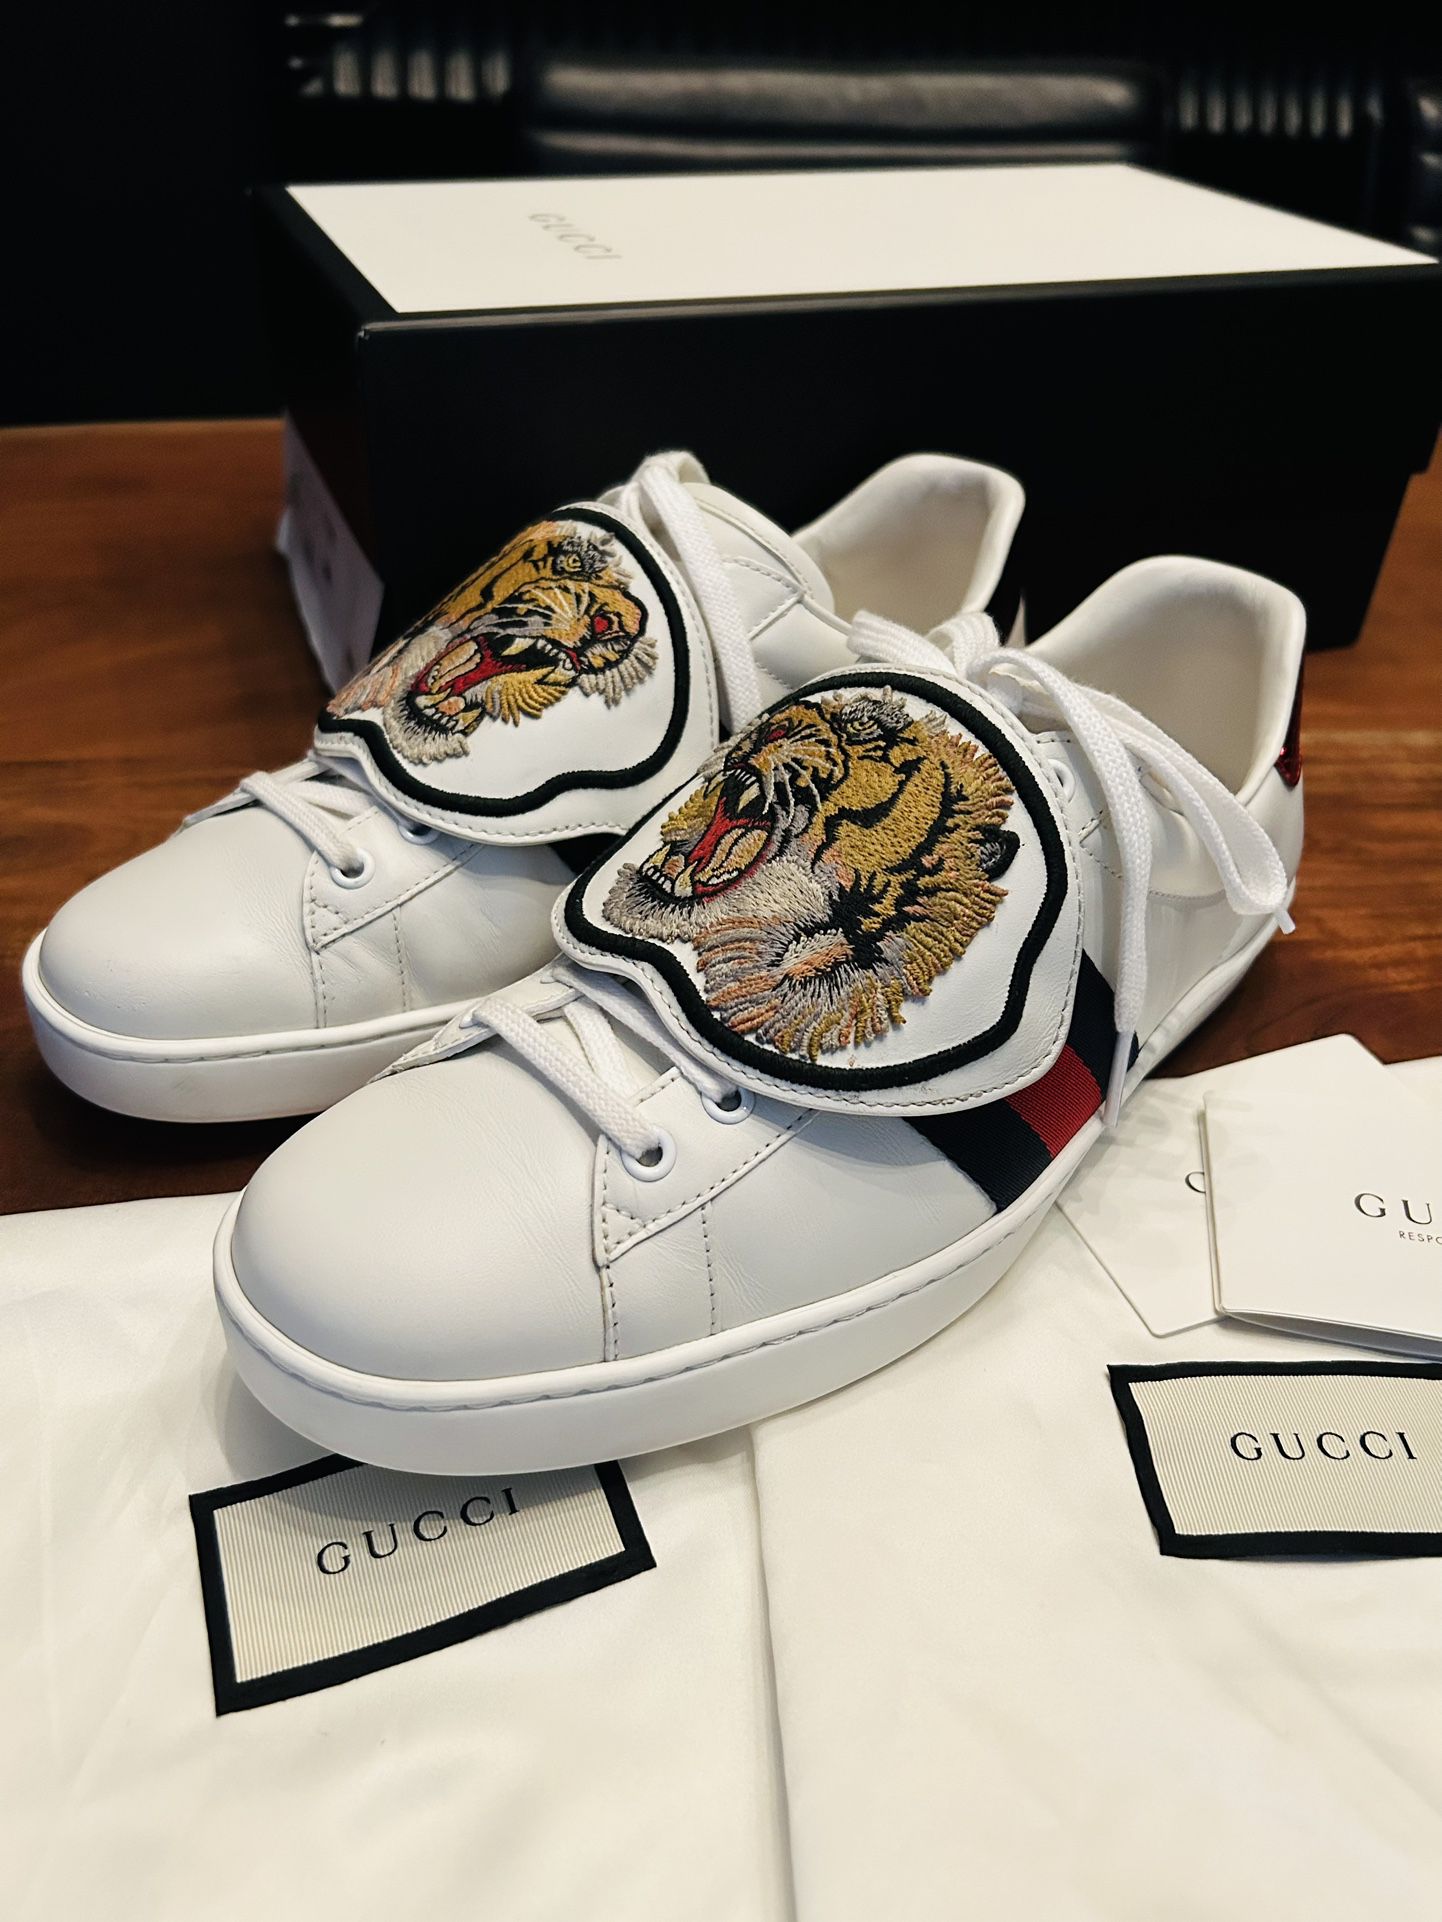 Gucci Ace Tiger Patch Sneakers Size 10 Us/9 Gucci Retail $830